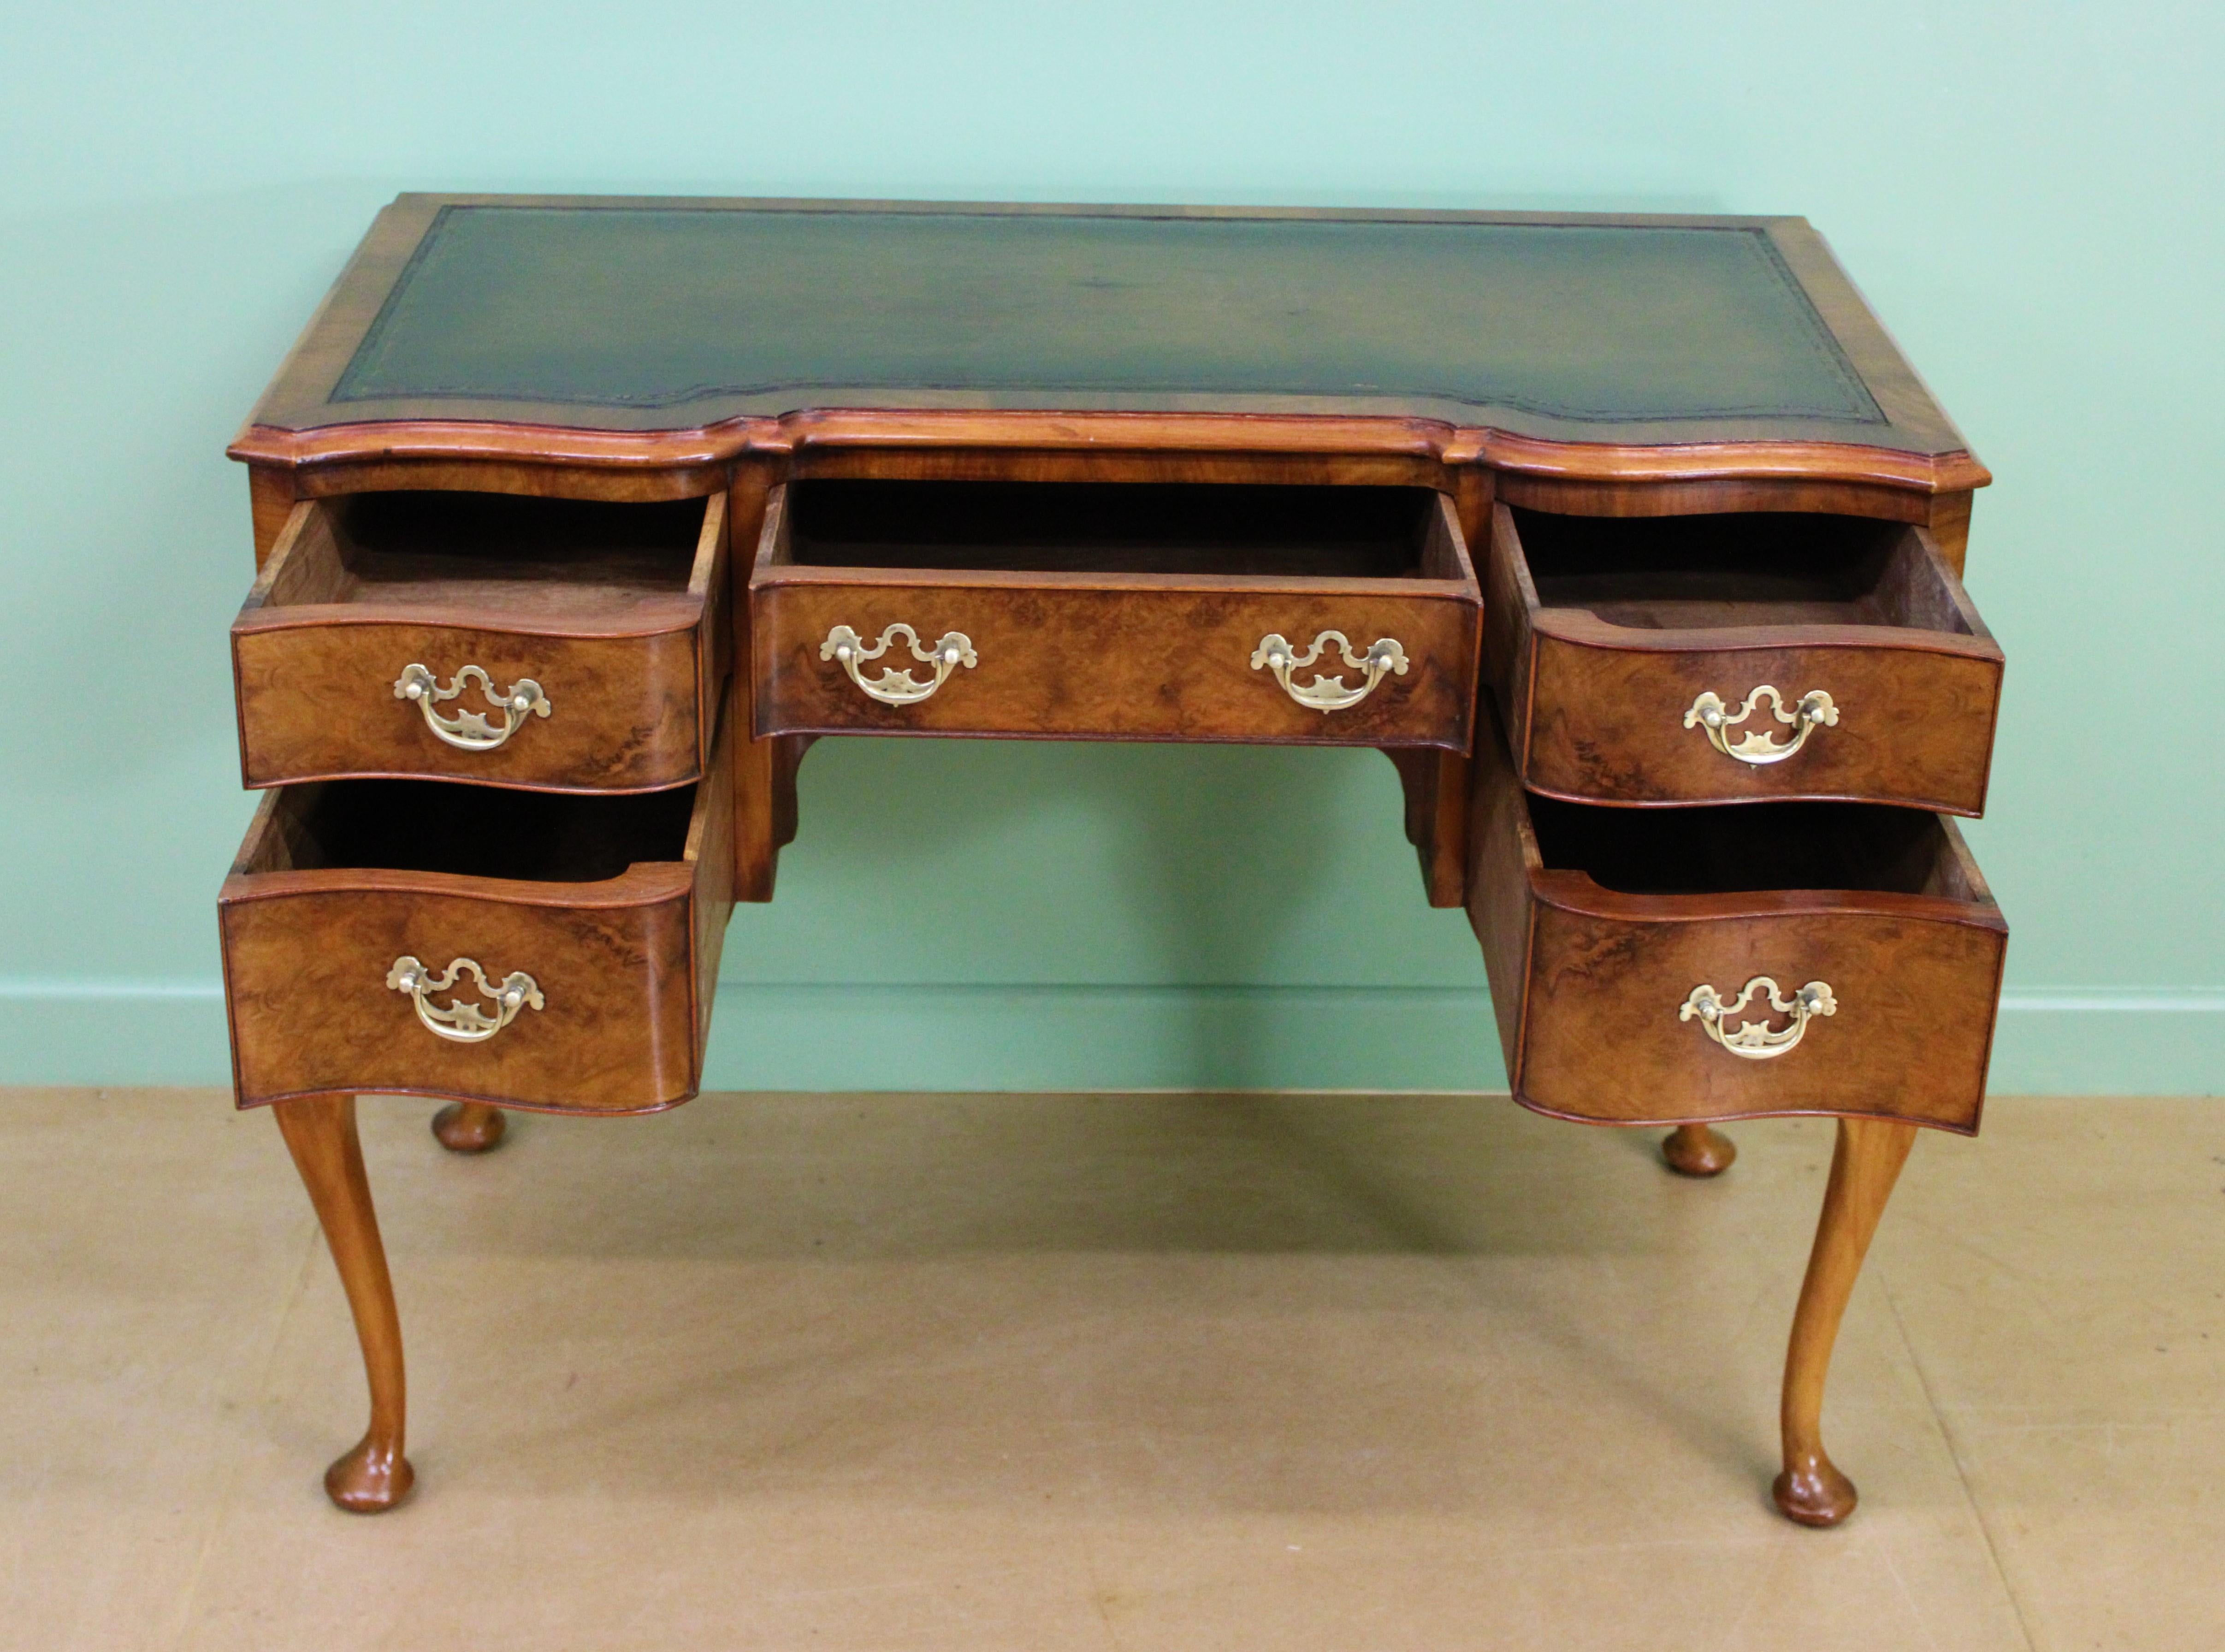 20th Century Serpentine Fronted Burr Walnut Writing Table